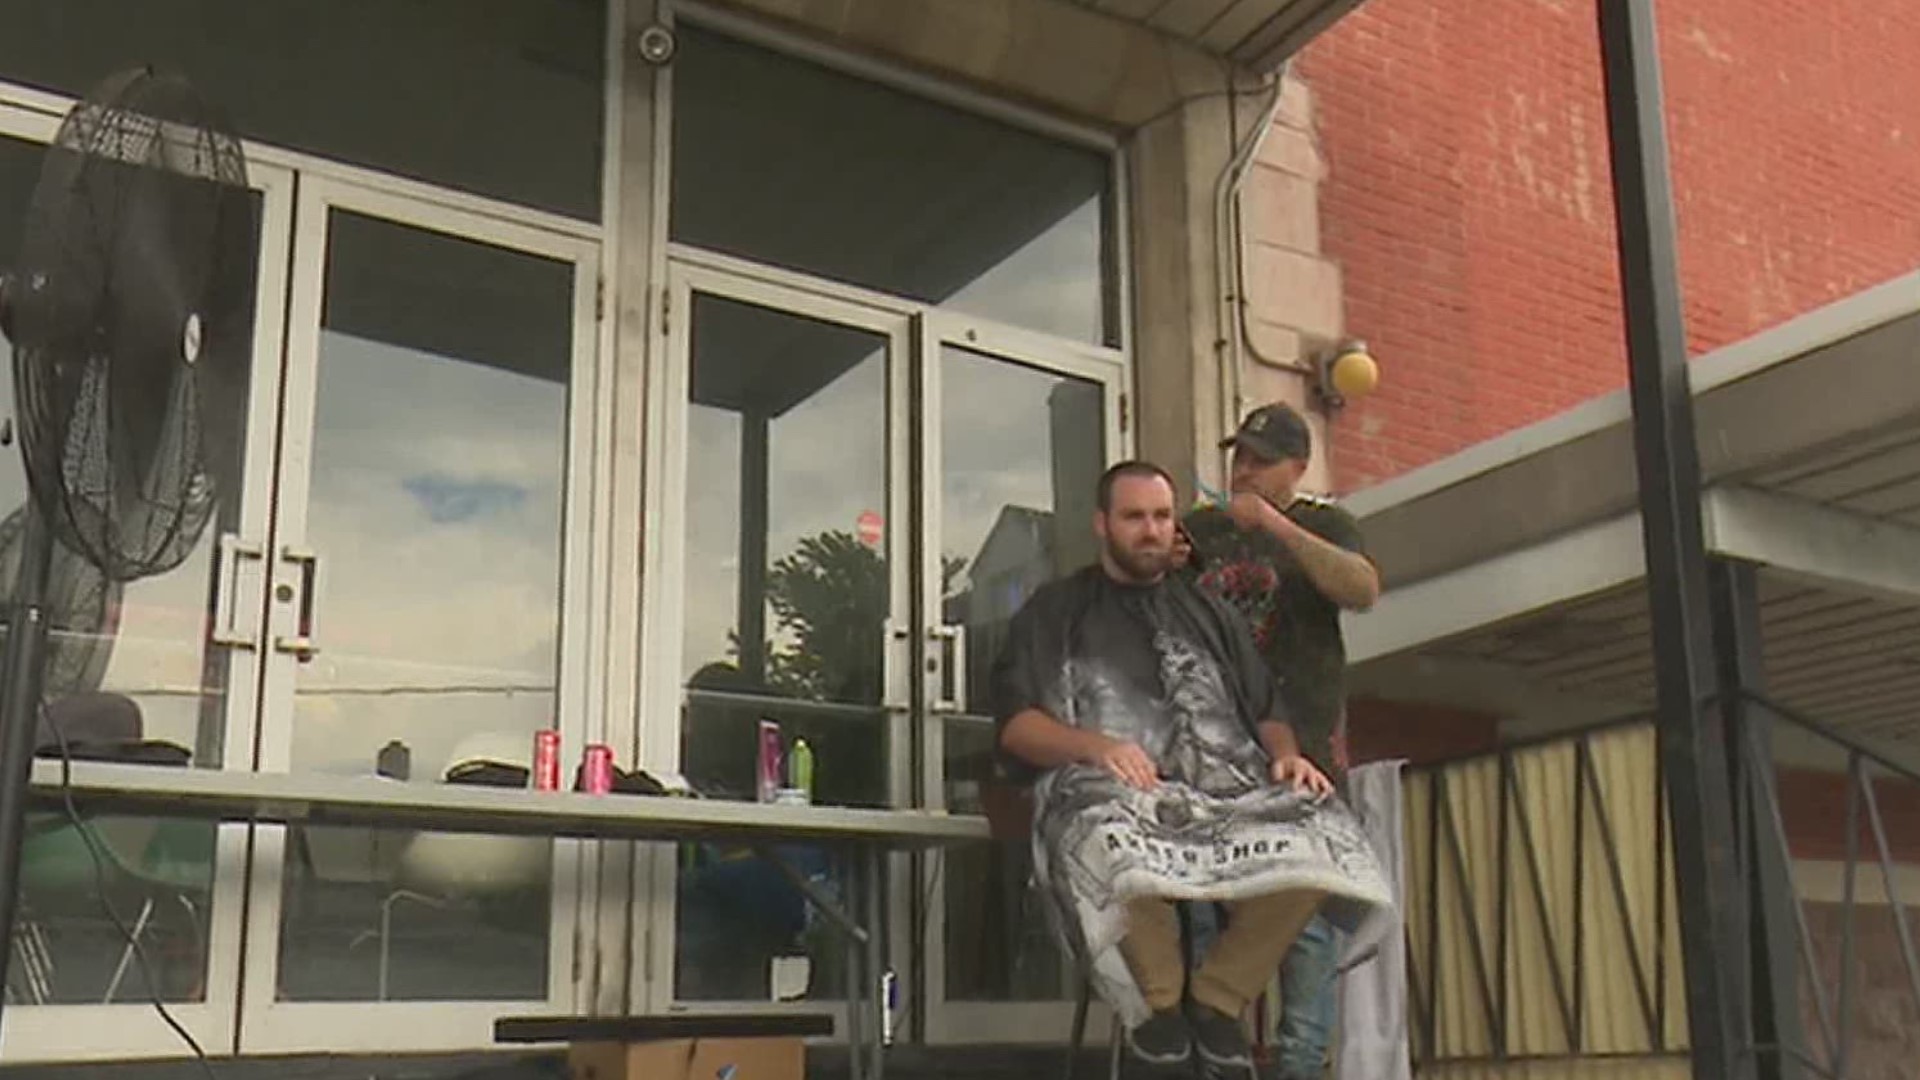 Richard Wojcik is giving haircuts around the clock until 7 a.m. Monday morning to raise money for the families of two teenagers who drowned last week.